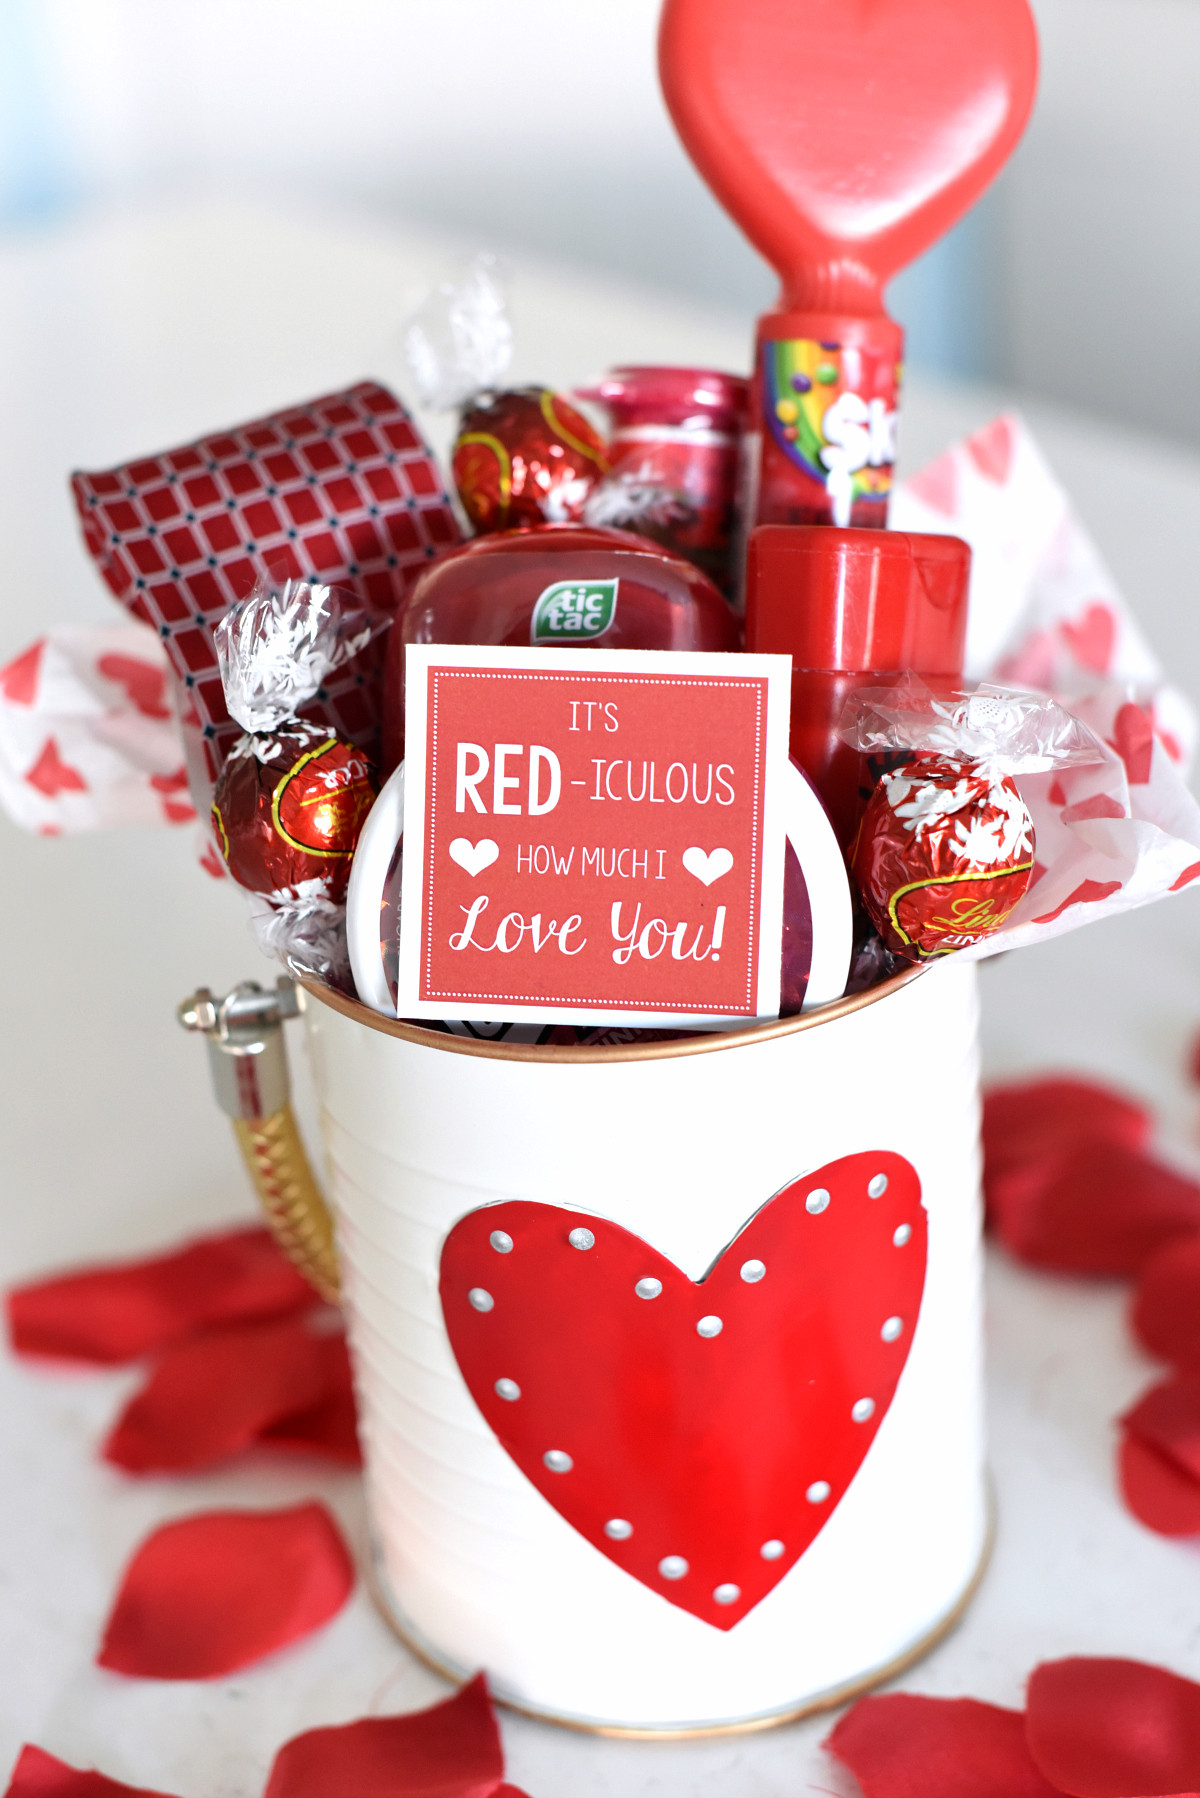 Valentines Gift Ideas For Toddlers
 25 DIY Valentine s Day Gift Ideas Teens Will Love